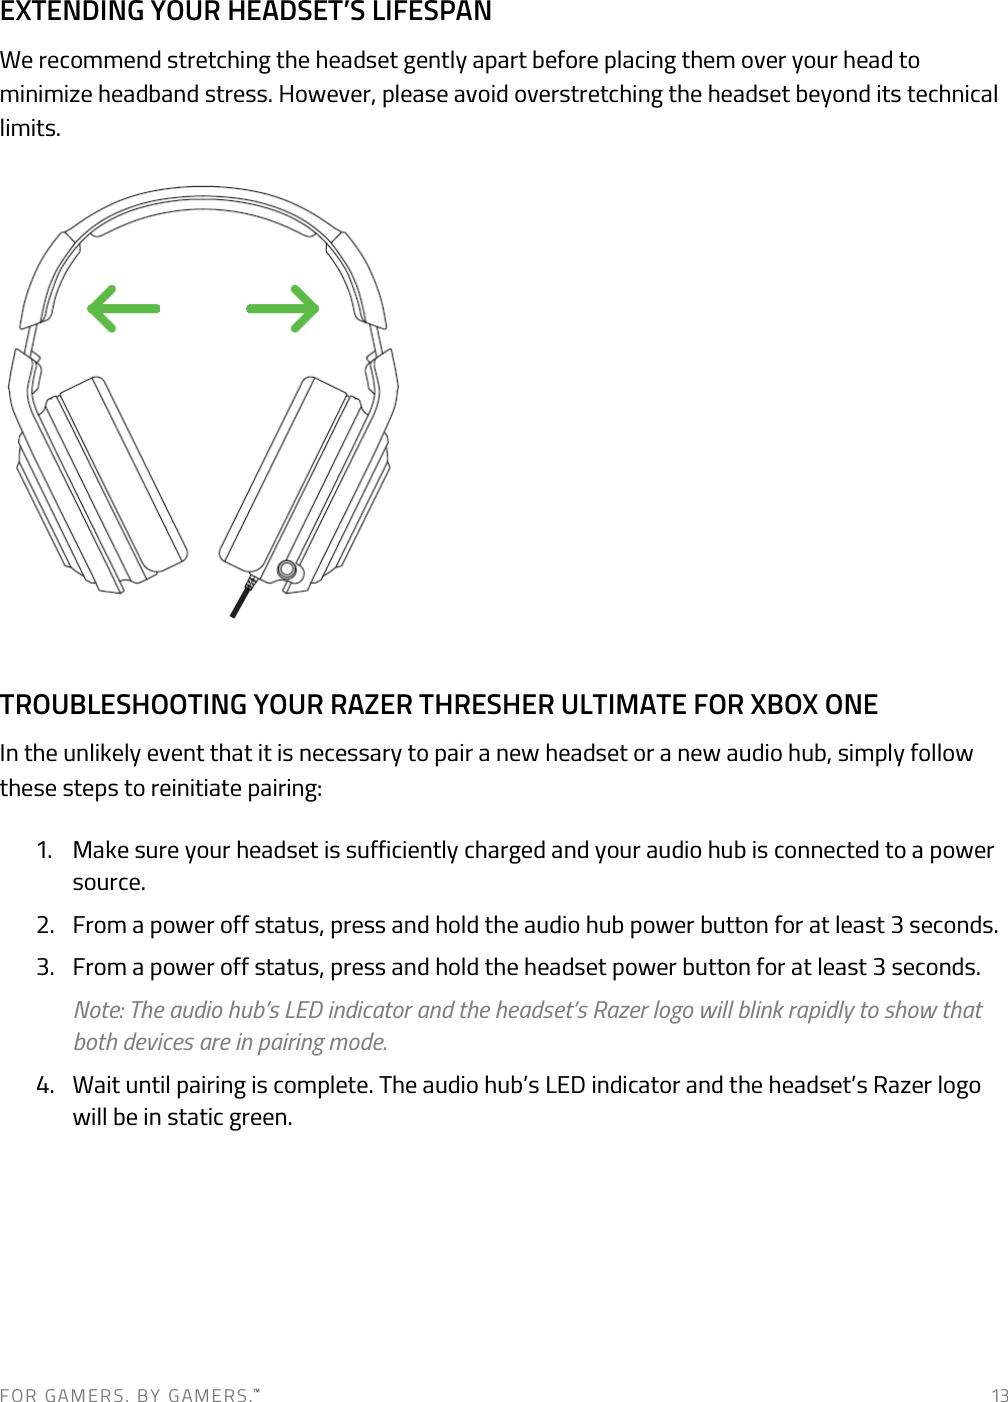 F O R   G A M E R S .   B Y   G AM E R S .™   13 EXTENDING YOUR HEADSET’S LIFESPAN We recommend stretching the headset gently apart before placing them over your head to minimize headband stress. However, please avoid overstretching the headset beyond its technical limits.  TROUBLESHOOTING YOUR RAZER THRESHER ULTIMATE FOR XBOX ONE In the unlikely event that it is necessary to pair a new headset or a new audio hub, simply follow these steps to reinitiate pairing: 1. Make sure your headset is sufficiently charged and your audio hub is connected to a power source.  2. From a power off status, press and hold the audio hub power button for at least 3 seconds.  3. From a power off status, press and hold the headset power button for at least 3 seconds.  Note: The audio hub’s LED indicator and the headset’s Razer logo will blink rapidly to show that both devices are in pairing mode.  4. Wait until pairing is complete. The audio hub’s LED indicator and the headset’s Razer logo will be in static green.       